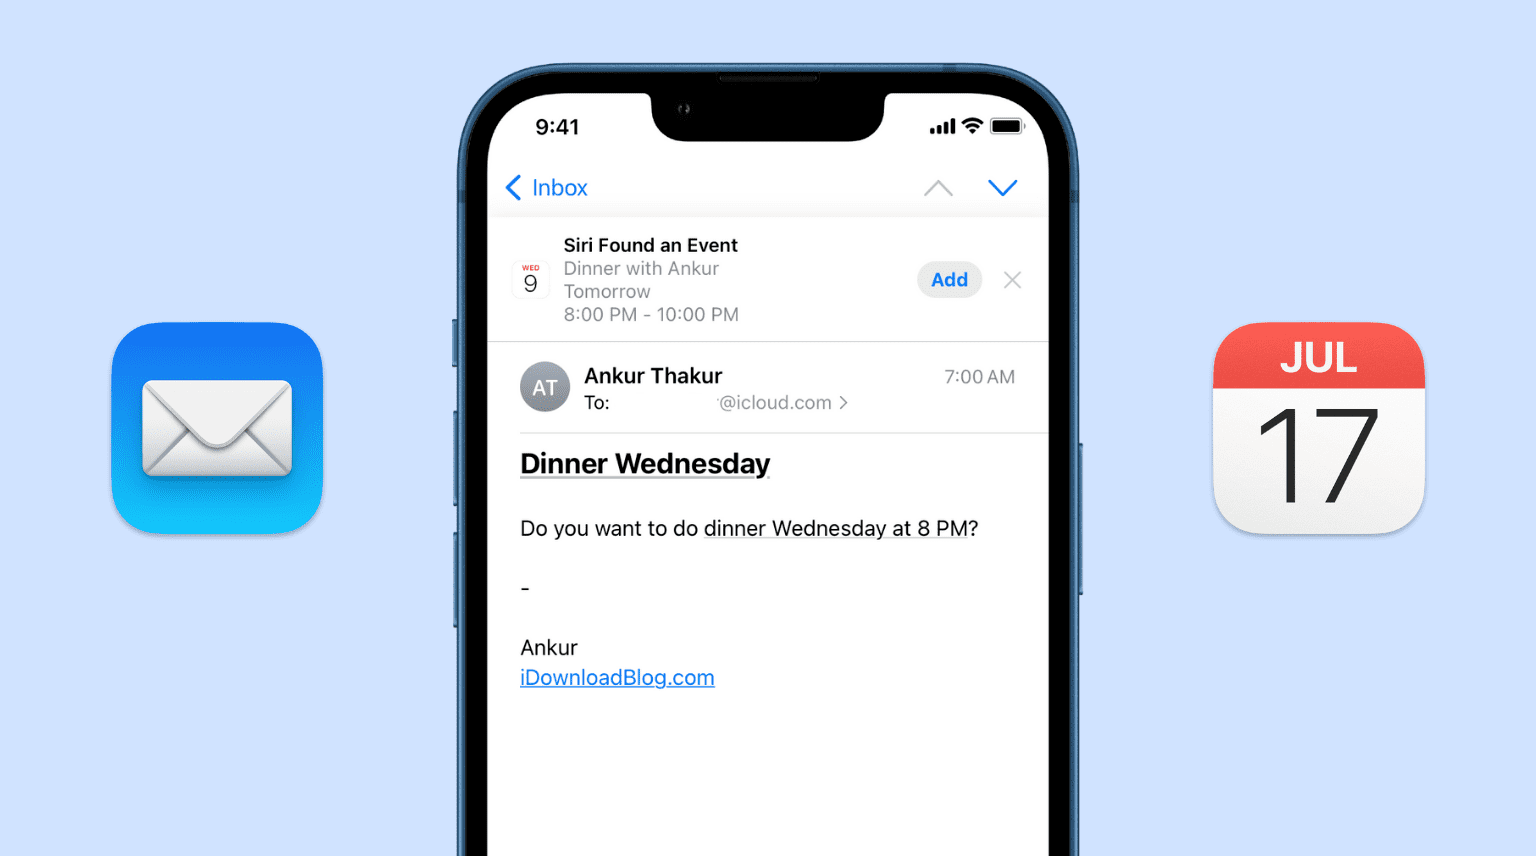 Suggested events in Apple Mail and Calendar apps